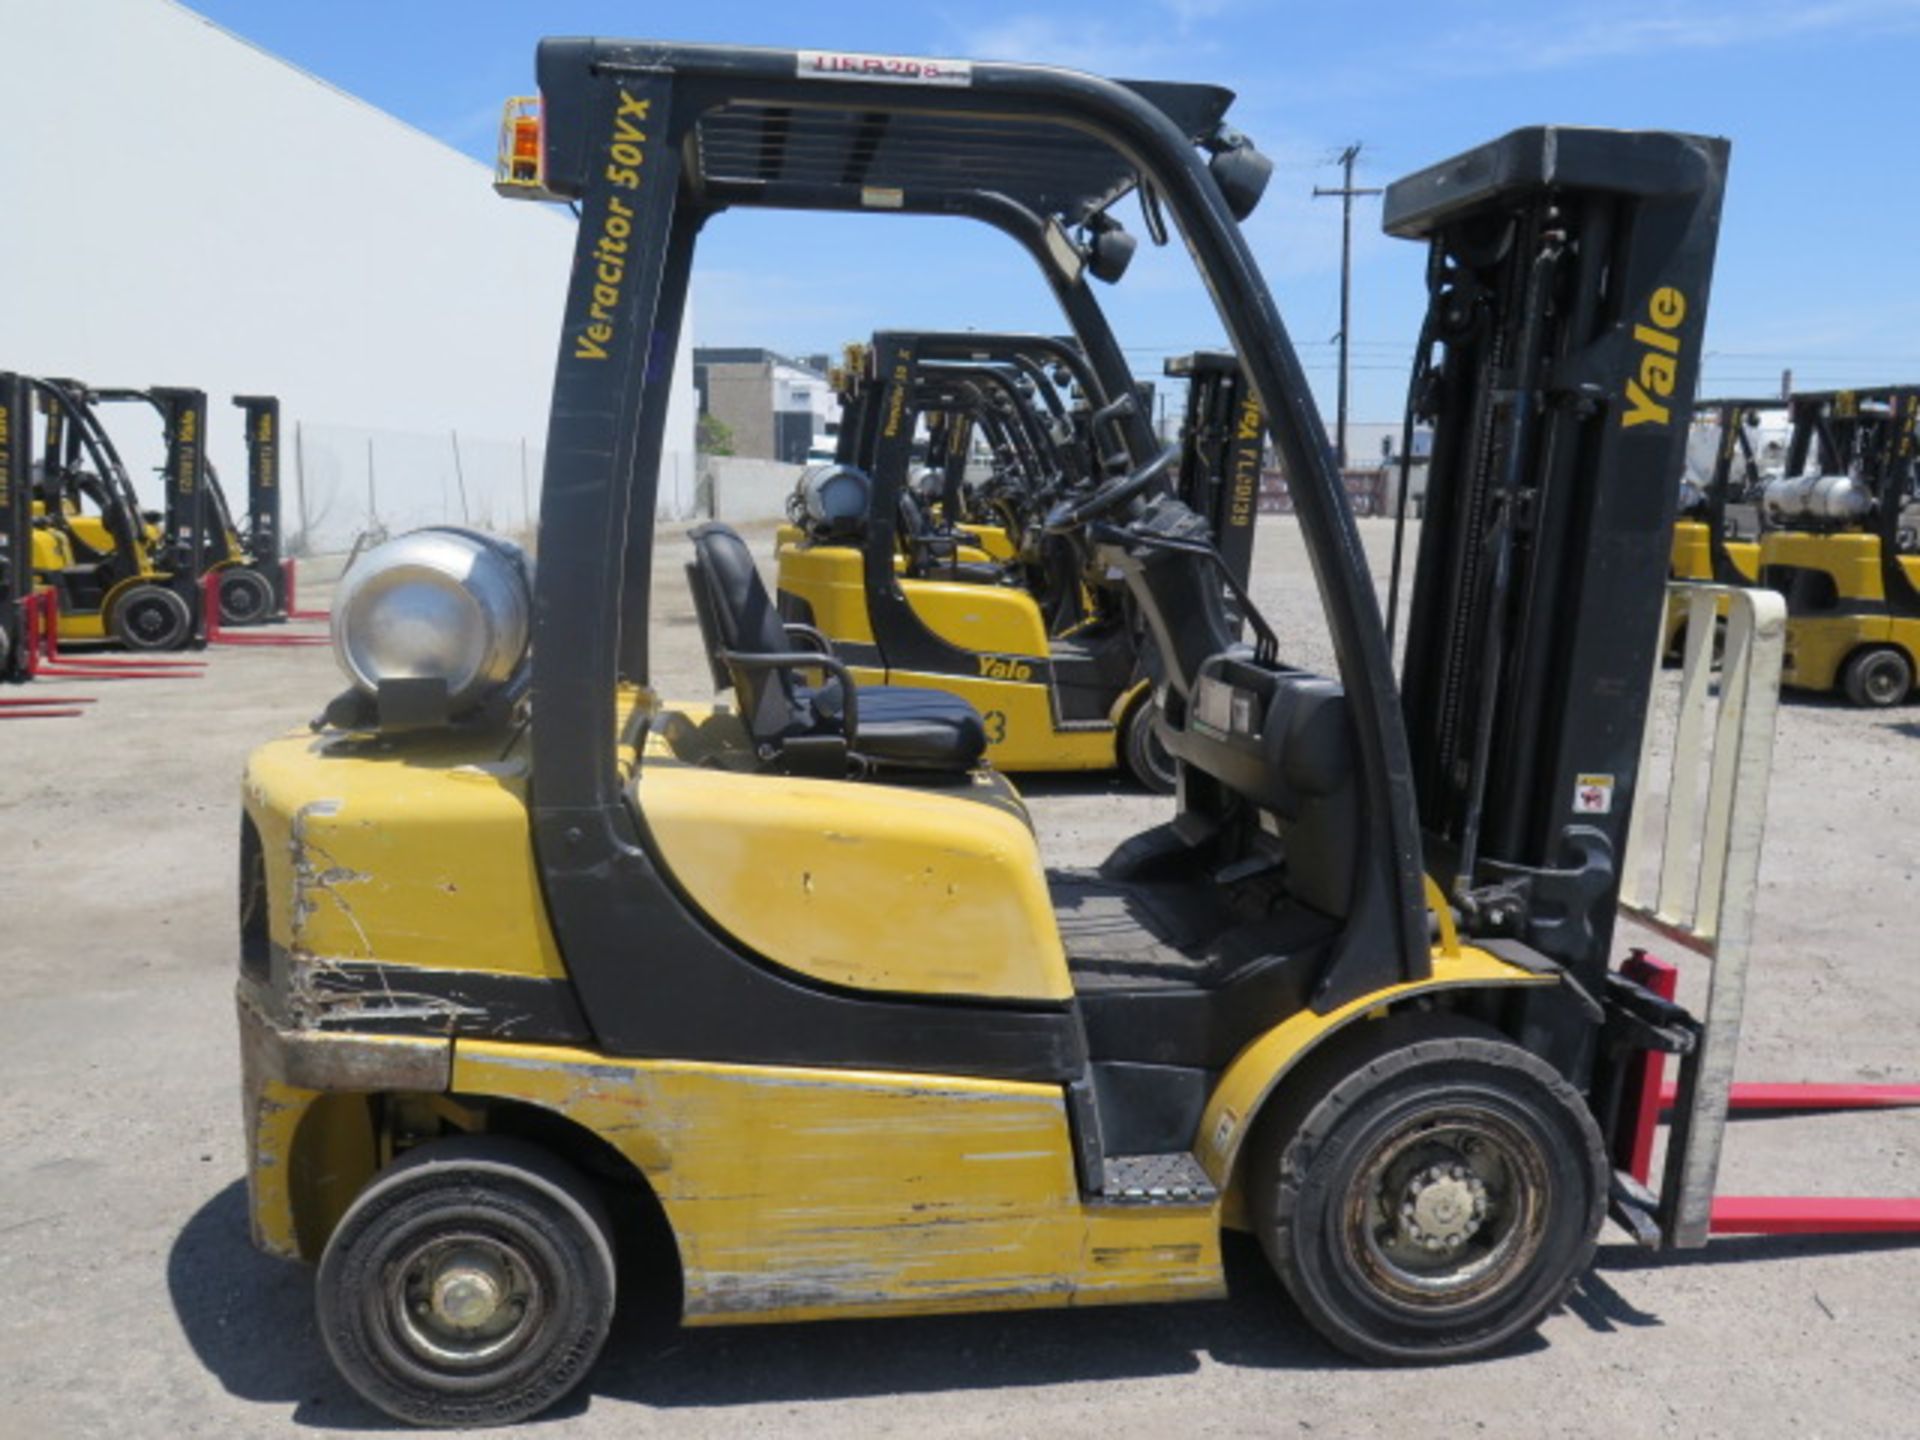 2016 Yale GLP050VXNDAE086 5000 Lb LPG Forklift s/n D875V03501N w/ 3-Stage, SS, 195” Lift, SOLD AS IS - Image 8 of 20